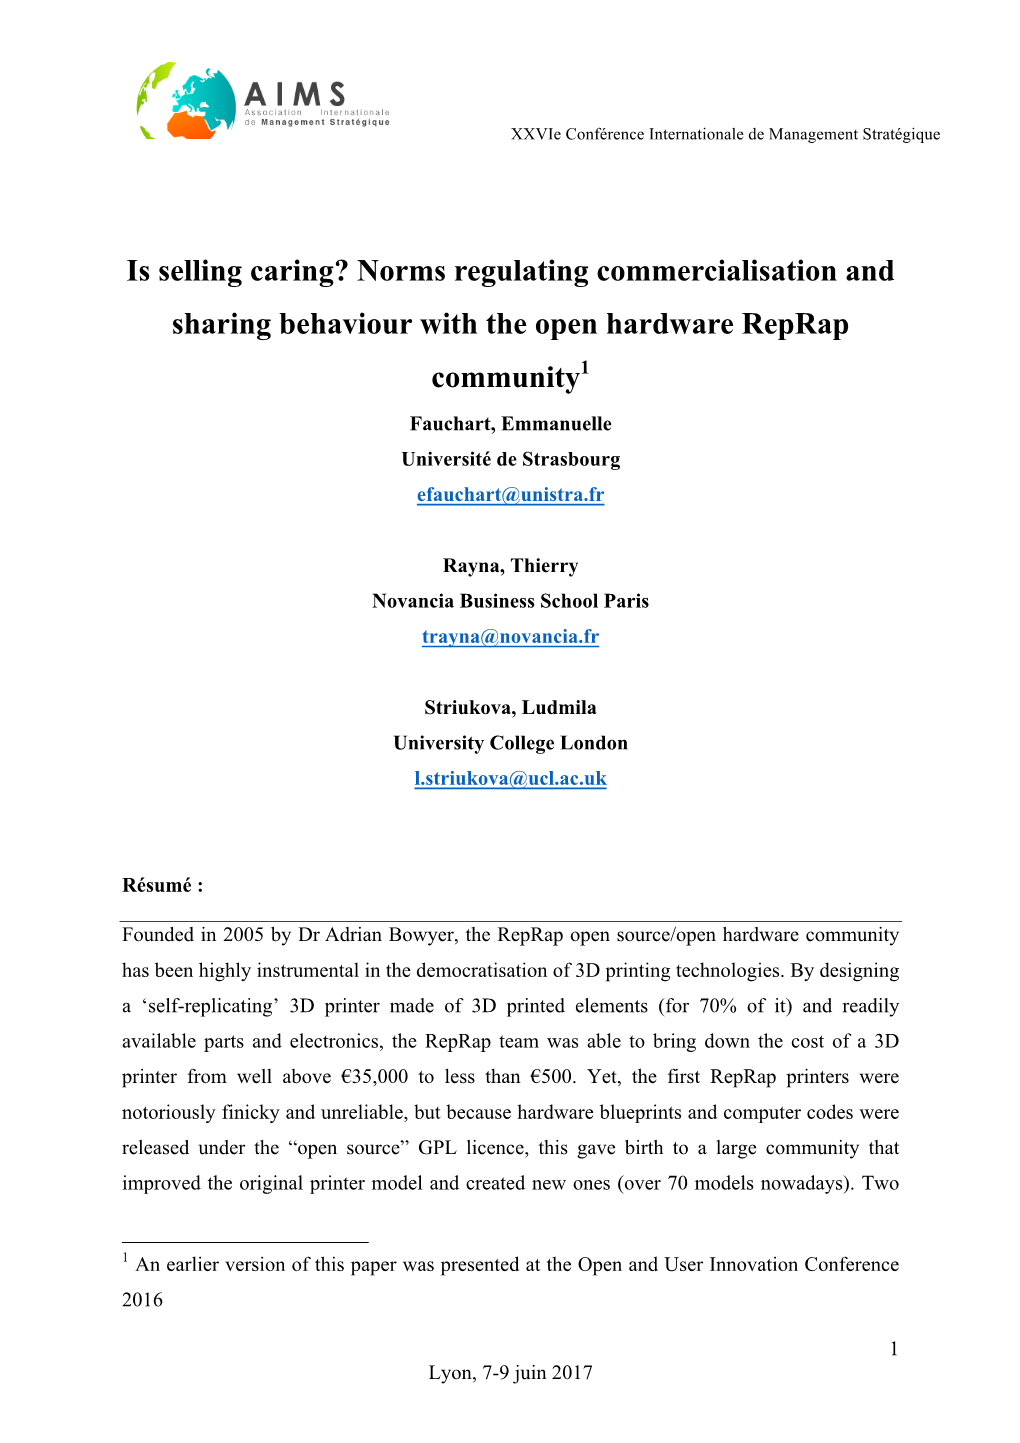 Is Selling Caring? Norms Regulating Commercialisation and Sharing